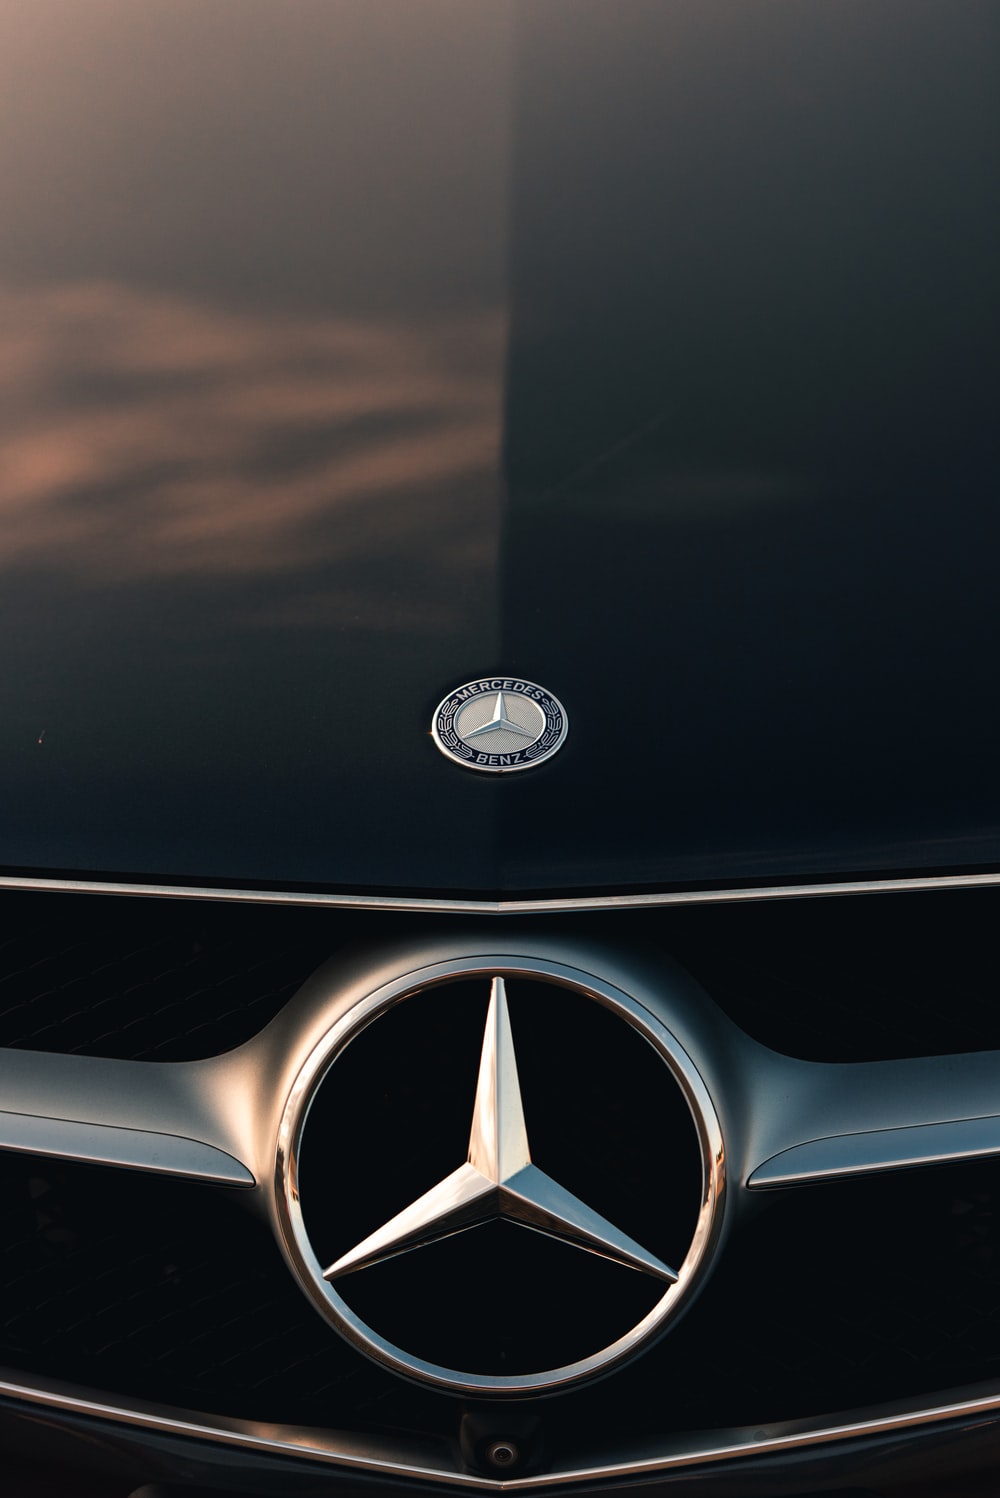 Mercedes Logo Picture. Download Free Image